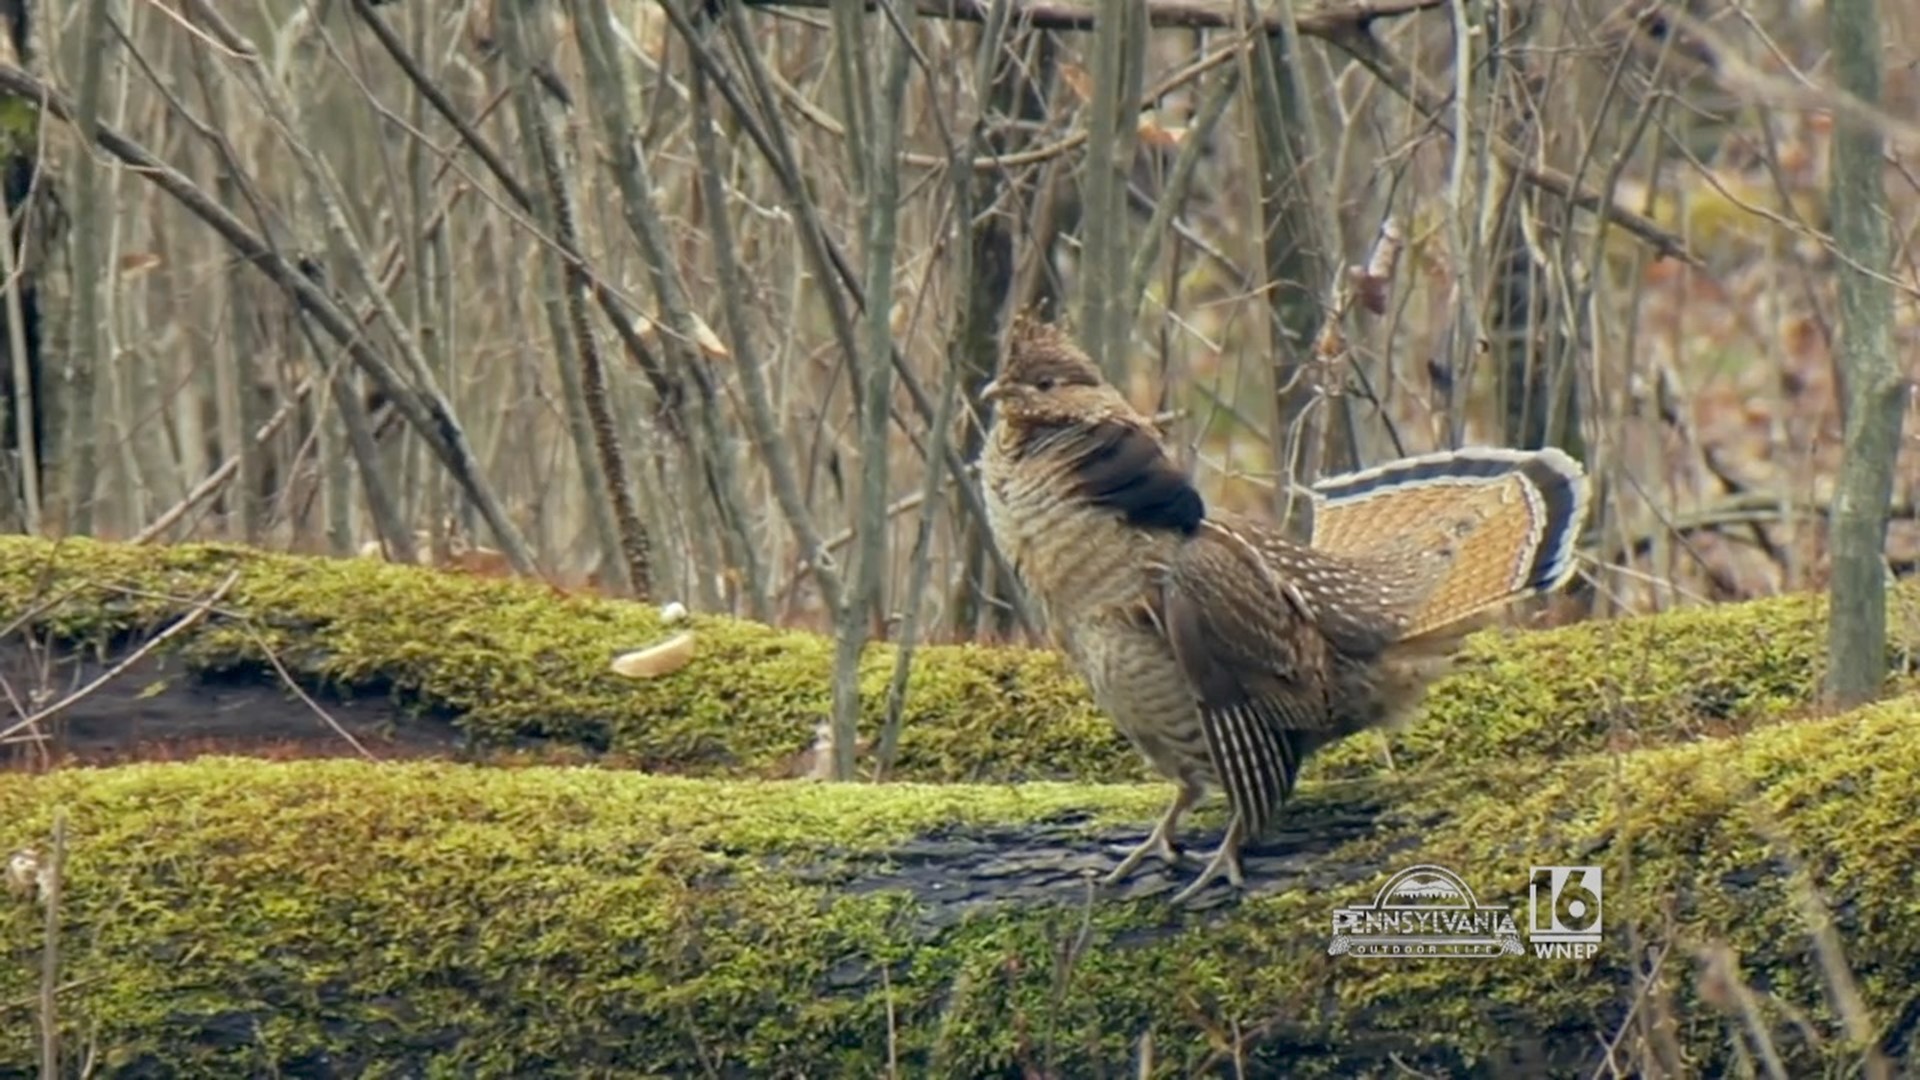 West nile virus is being blamed for the decline in ruffed grouse populations in Pennsyvlania.